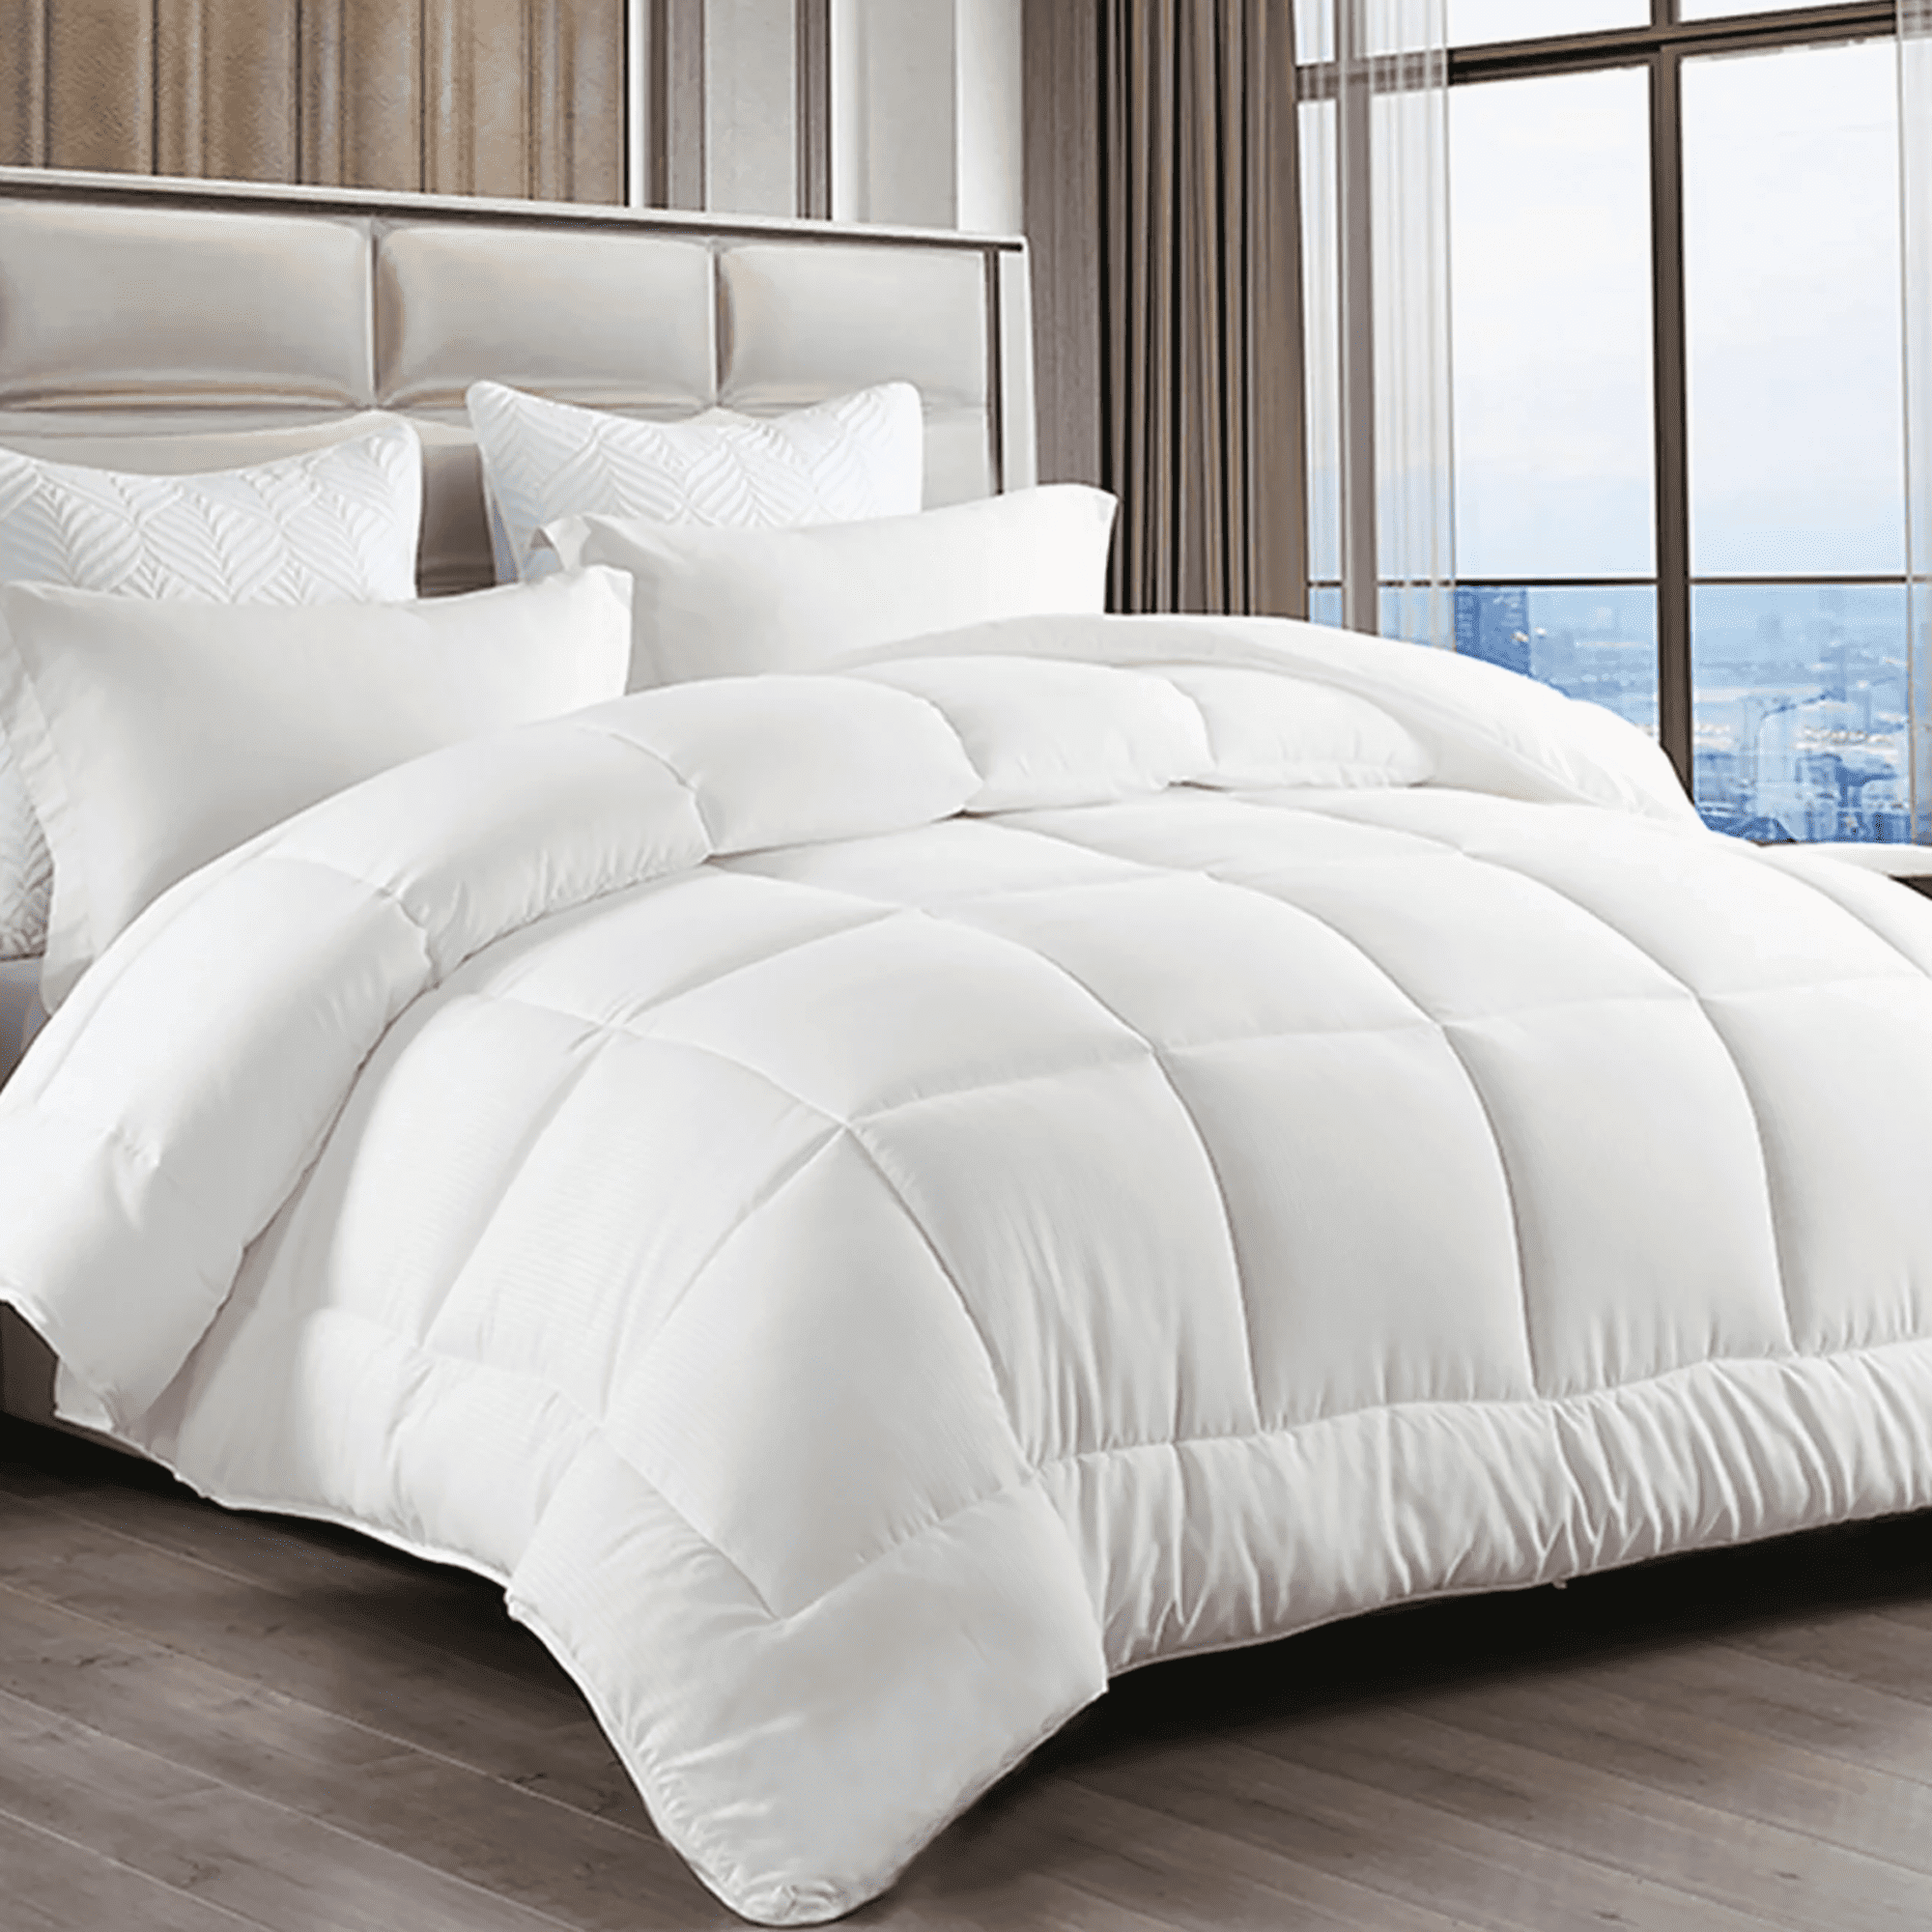 EMONIA Queen Comforter Duvet Insert, All Season Quilted Down Alternative,  Hotel Luxury Fluffy Soft Cooling, Hypoallergenic Machine Washable  Reversible